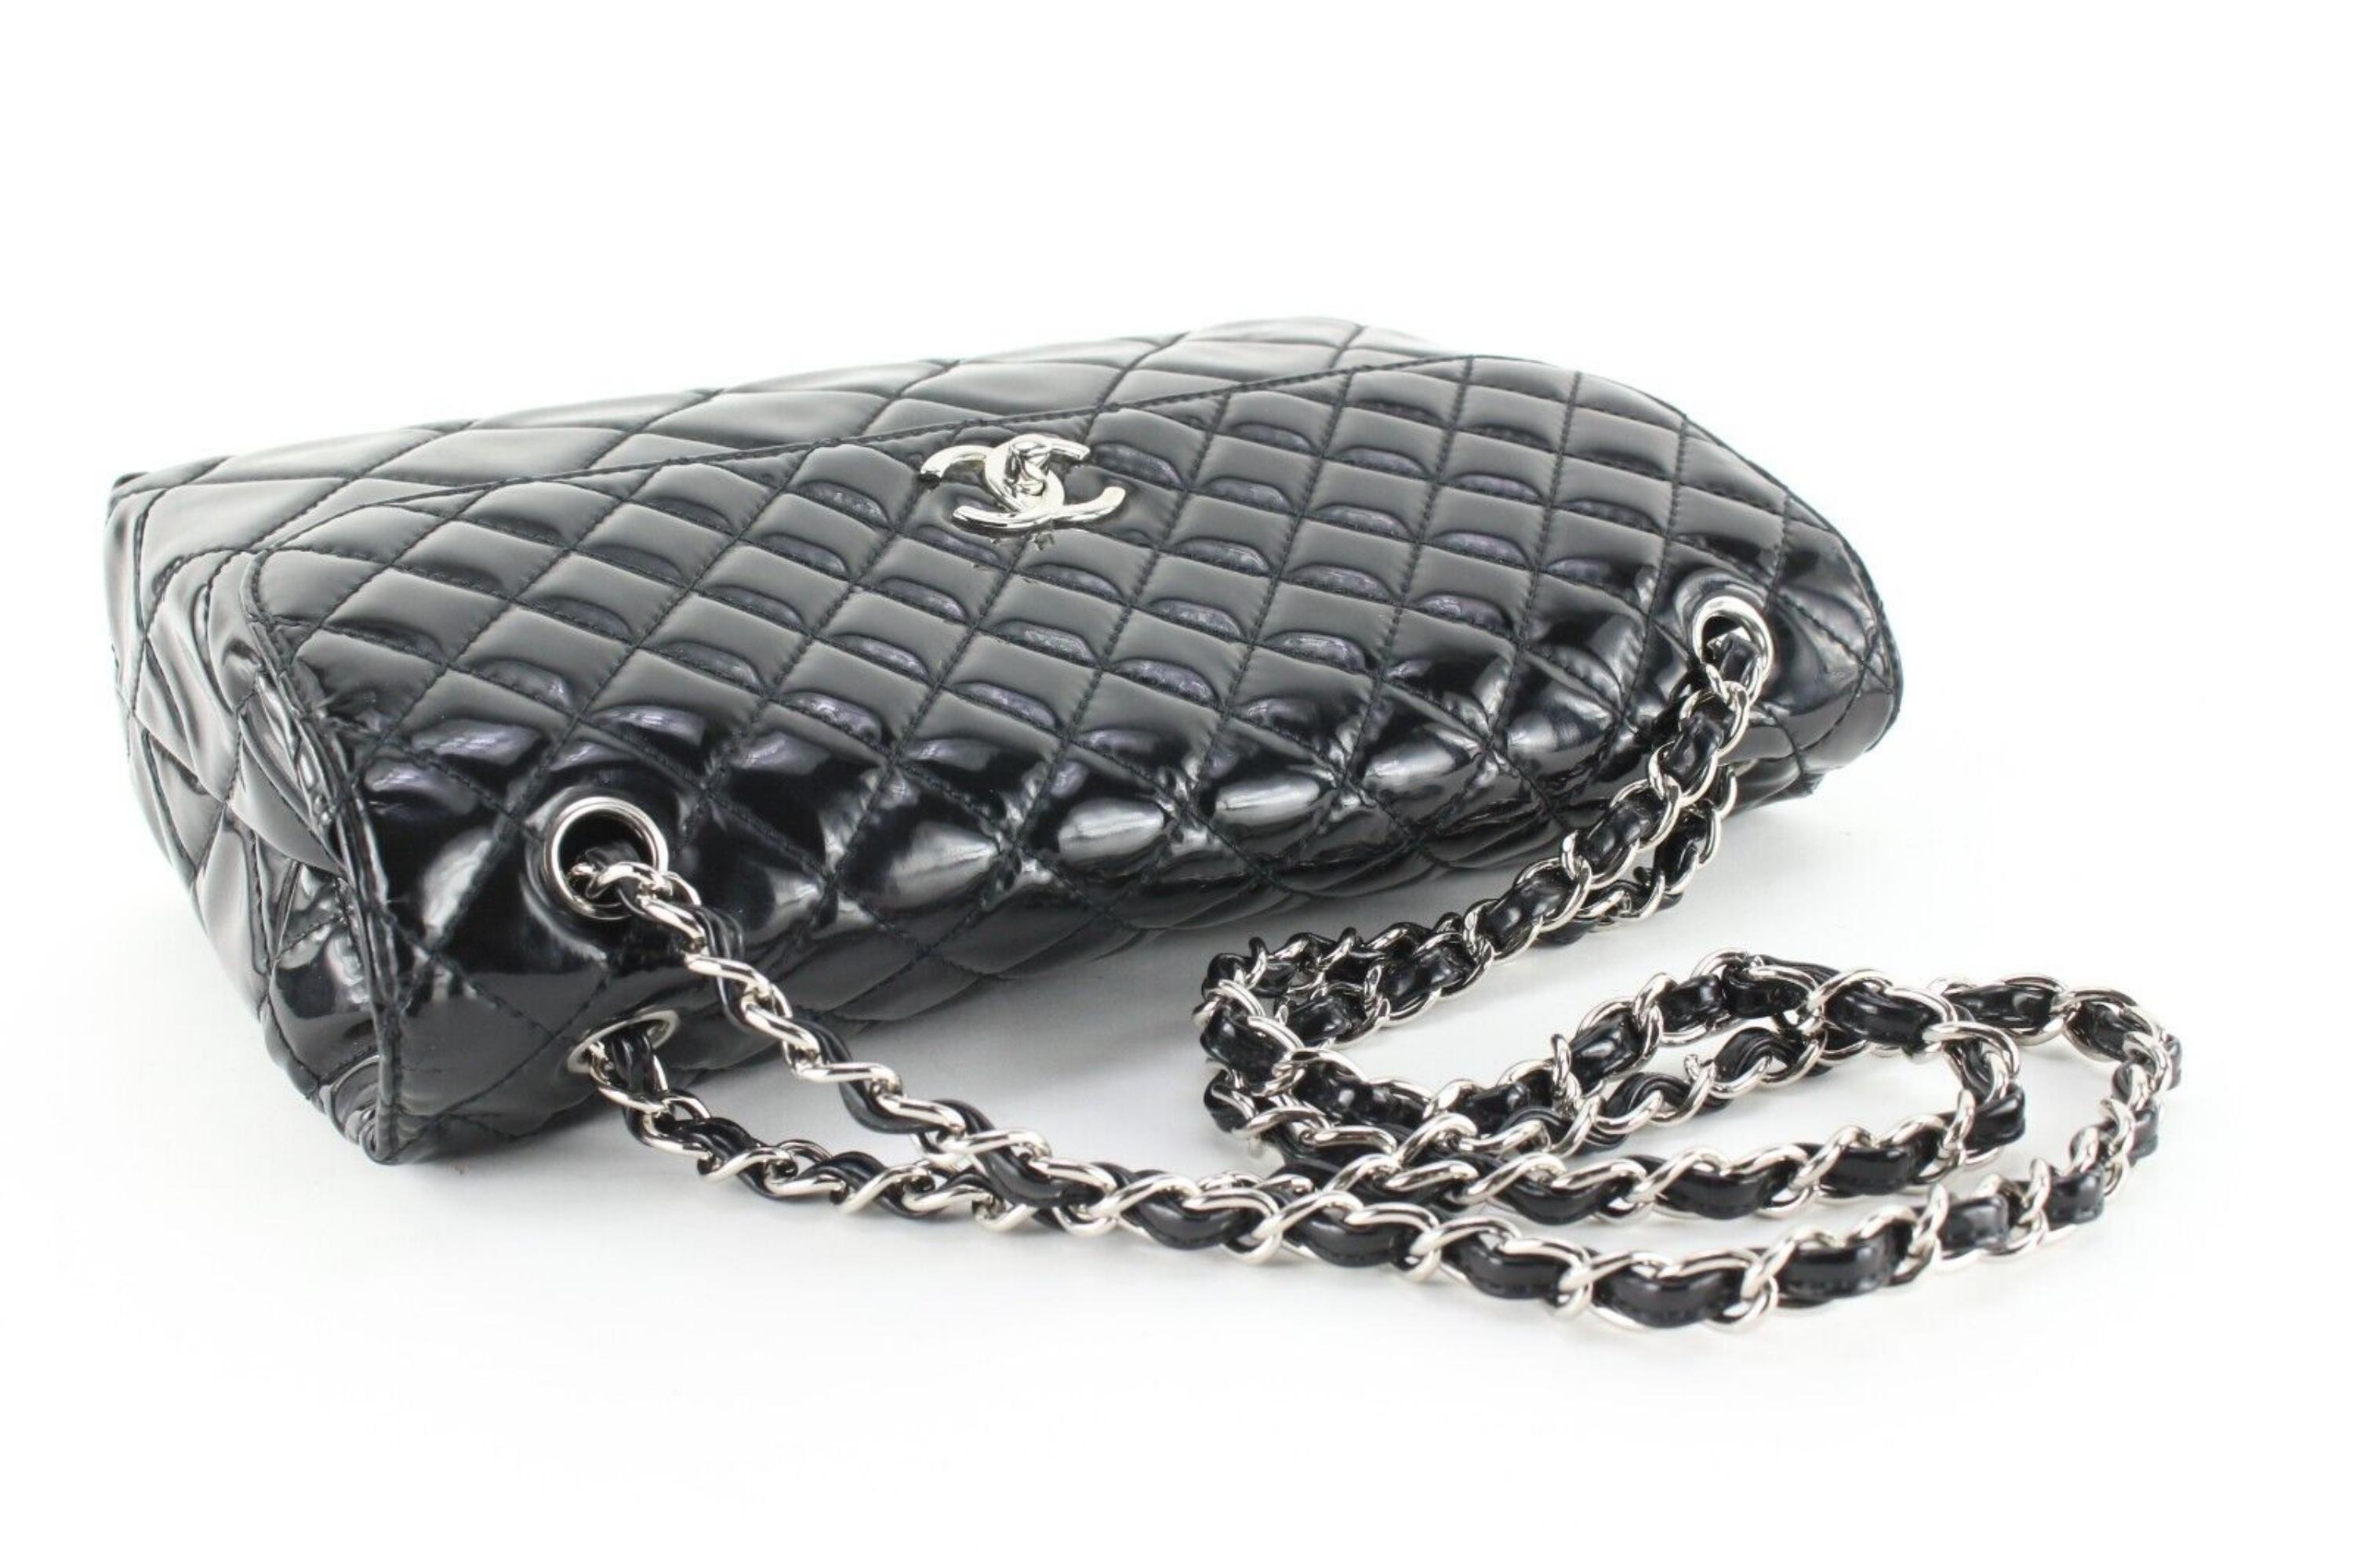 Chanel Black Quilted Patent Jumbo Flap SHW 89c26a For Sale 4